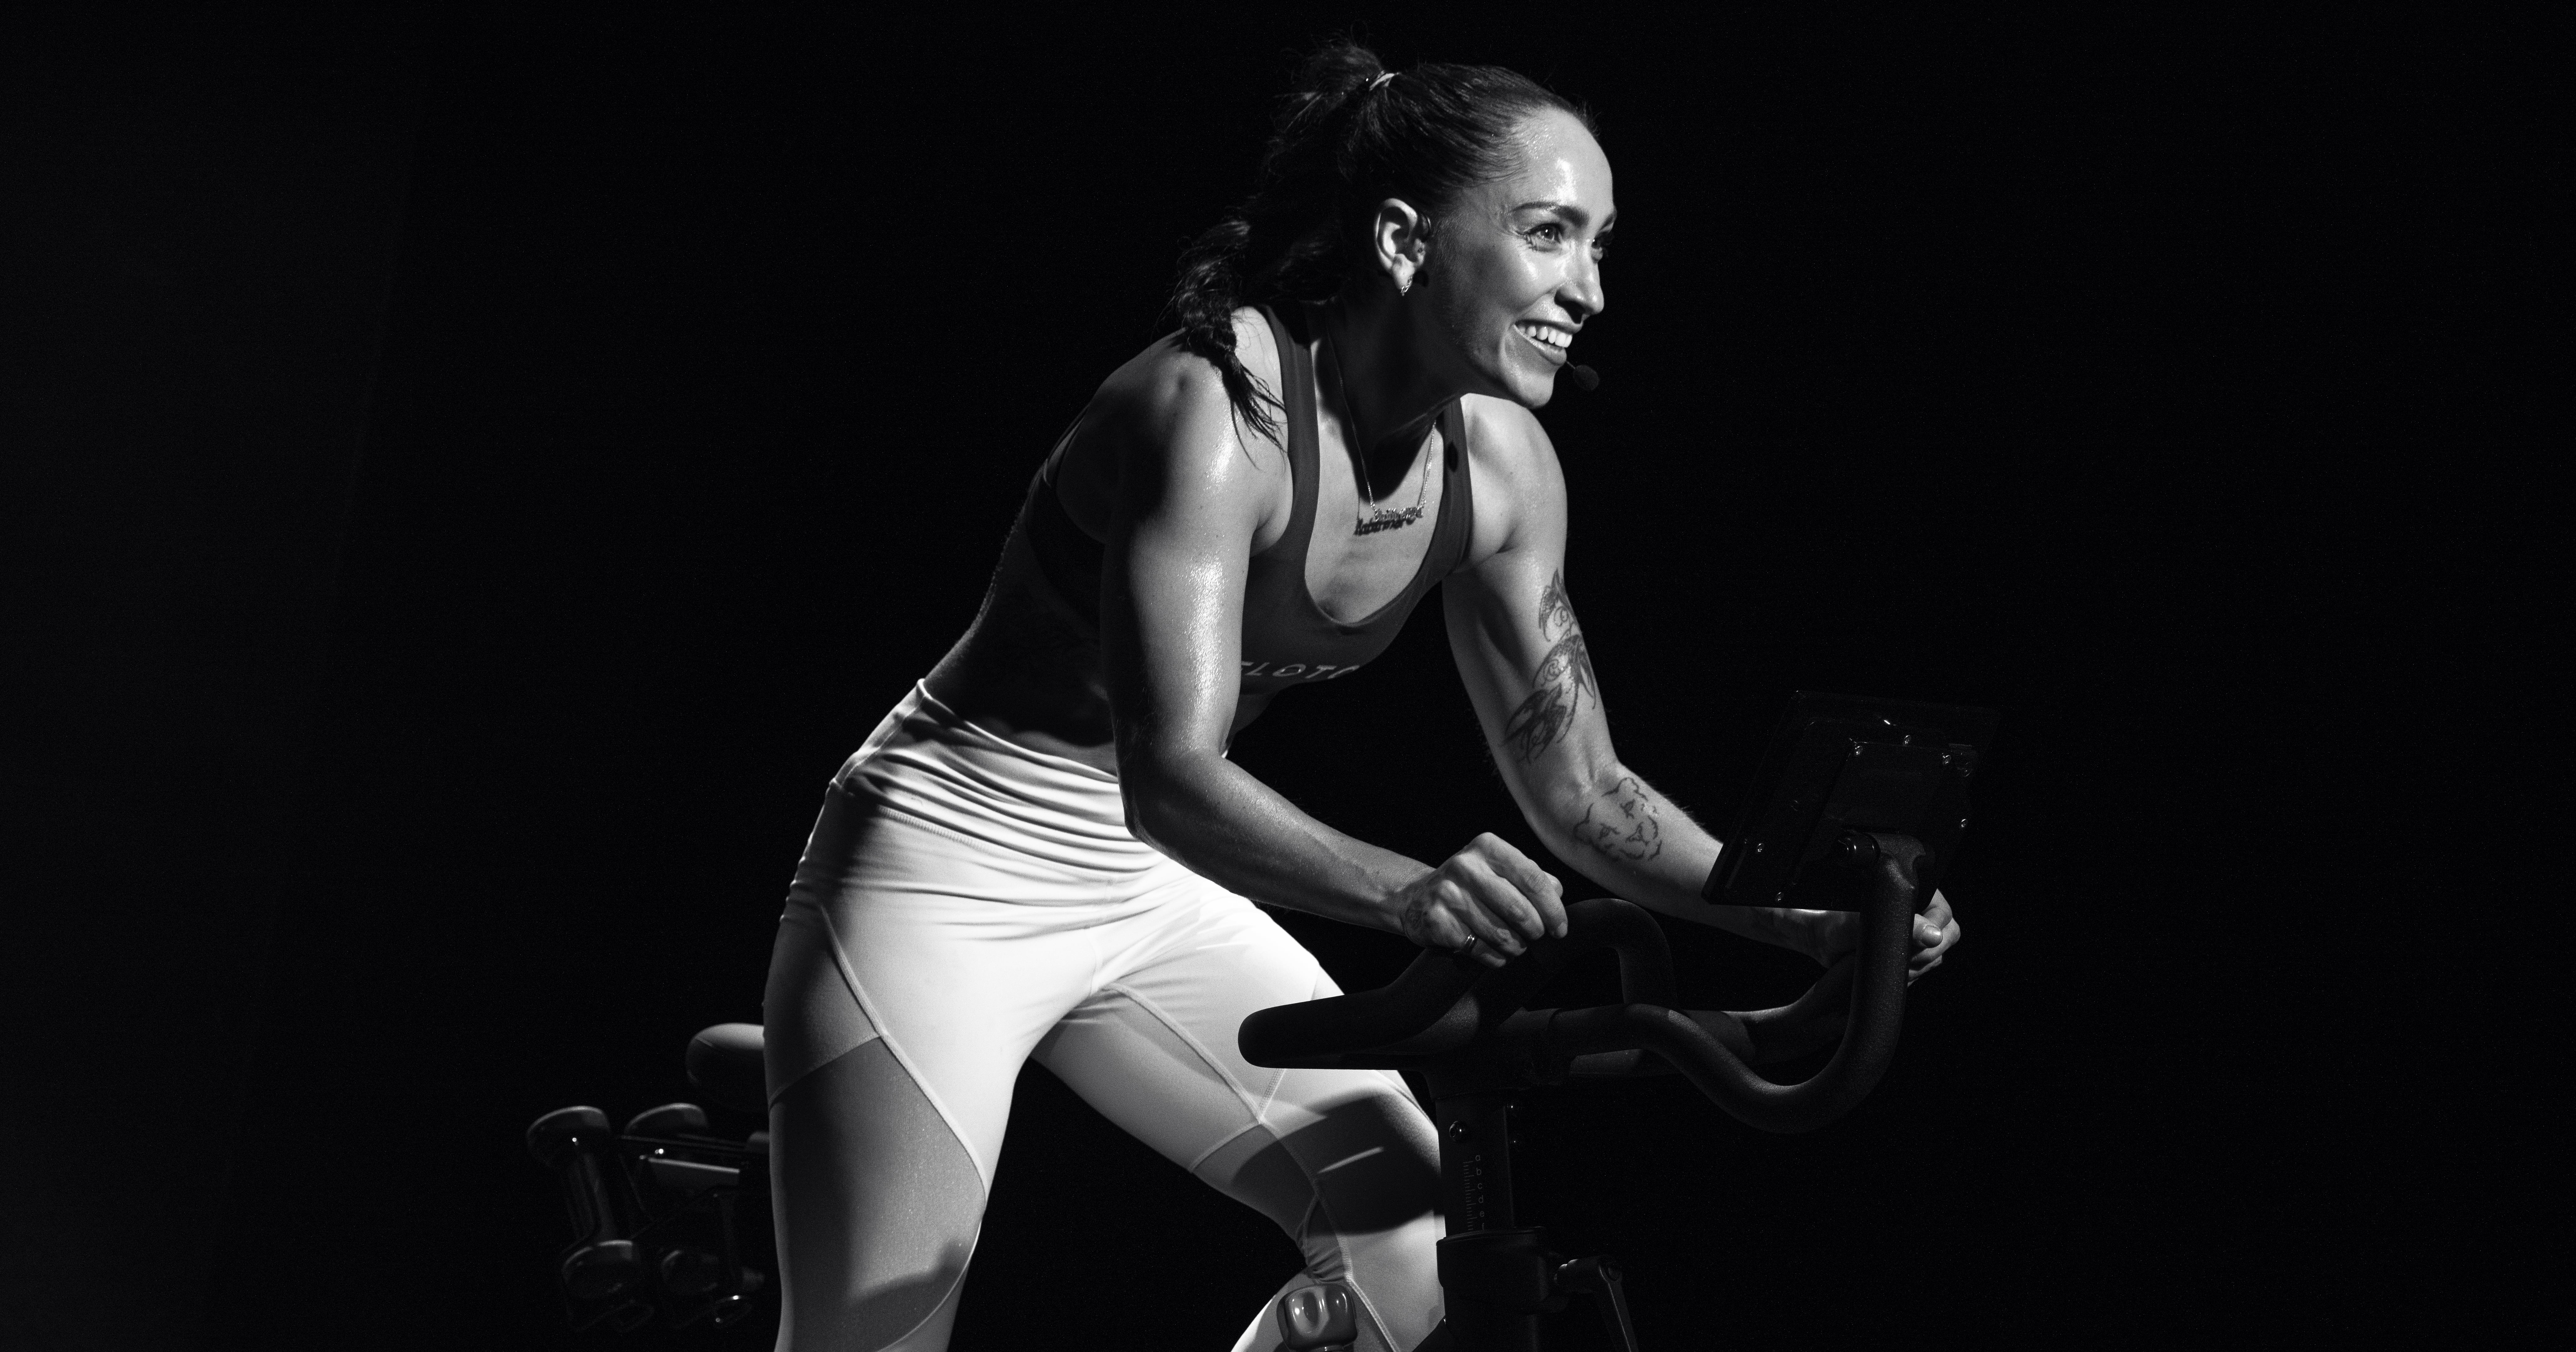 Photos from Peloton Trainers' Favorite Workout Moves